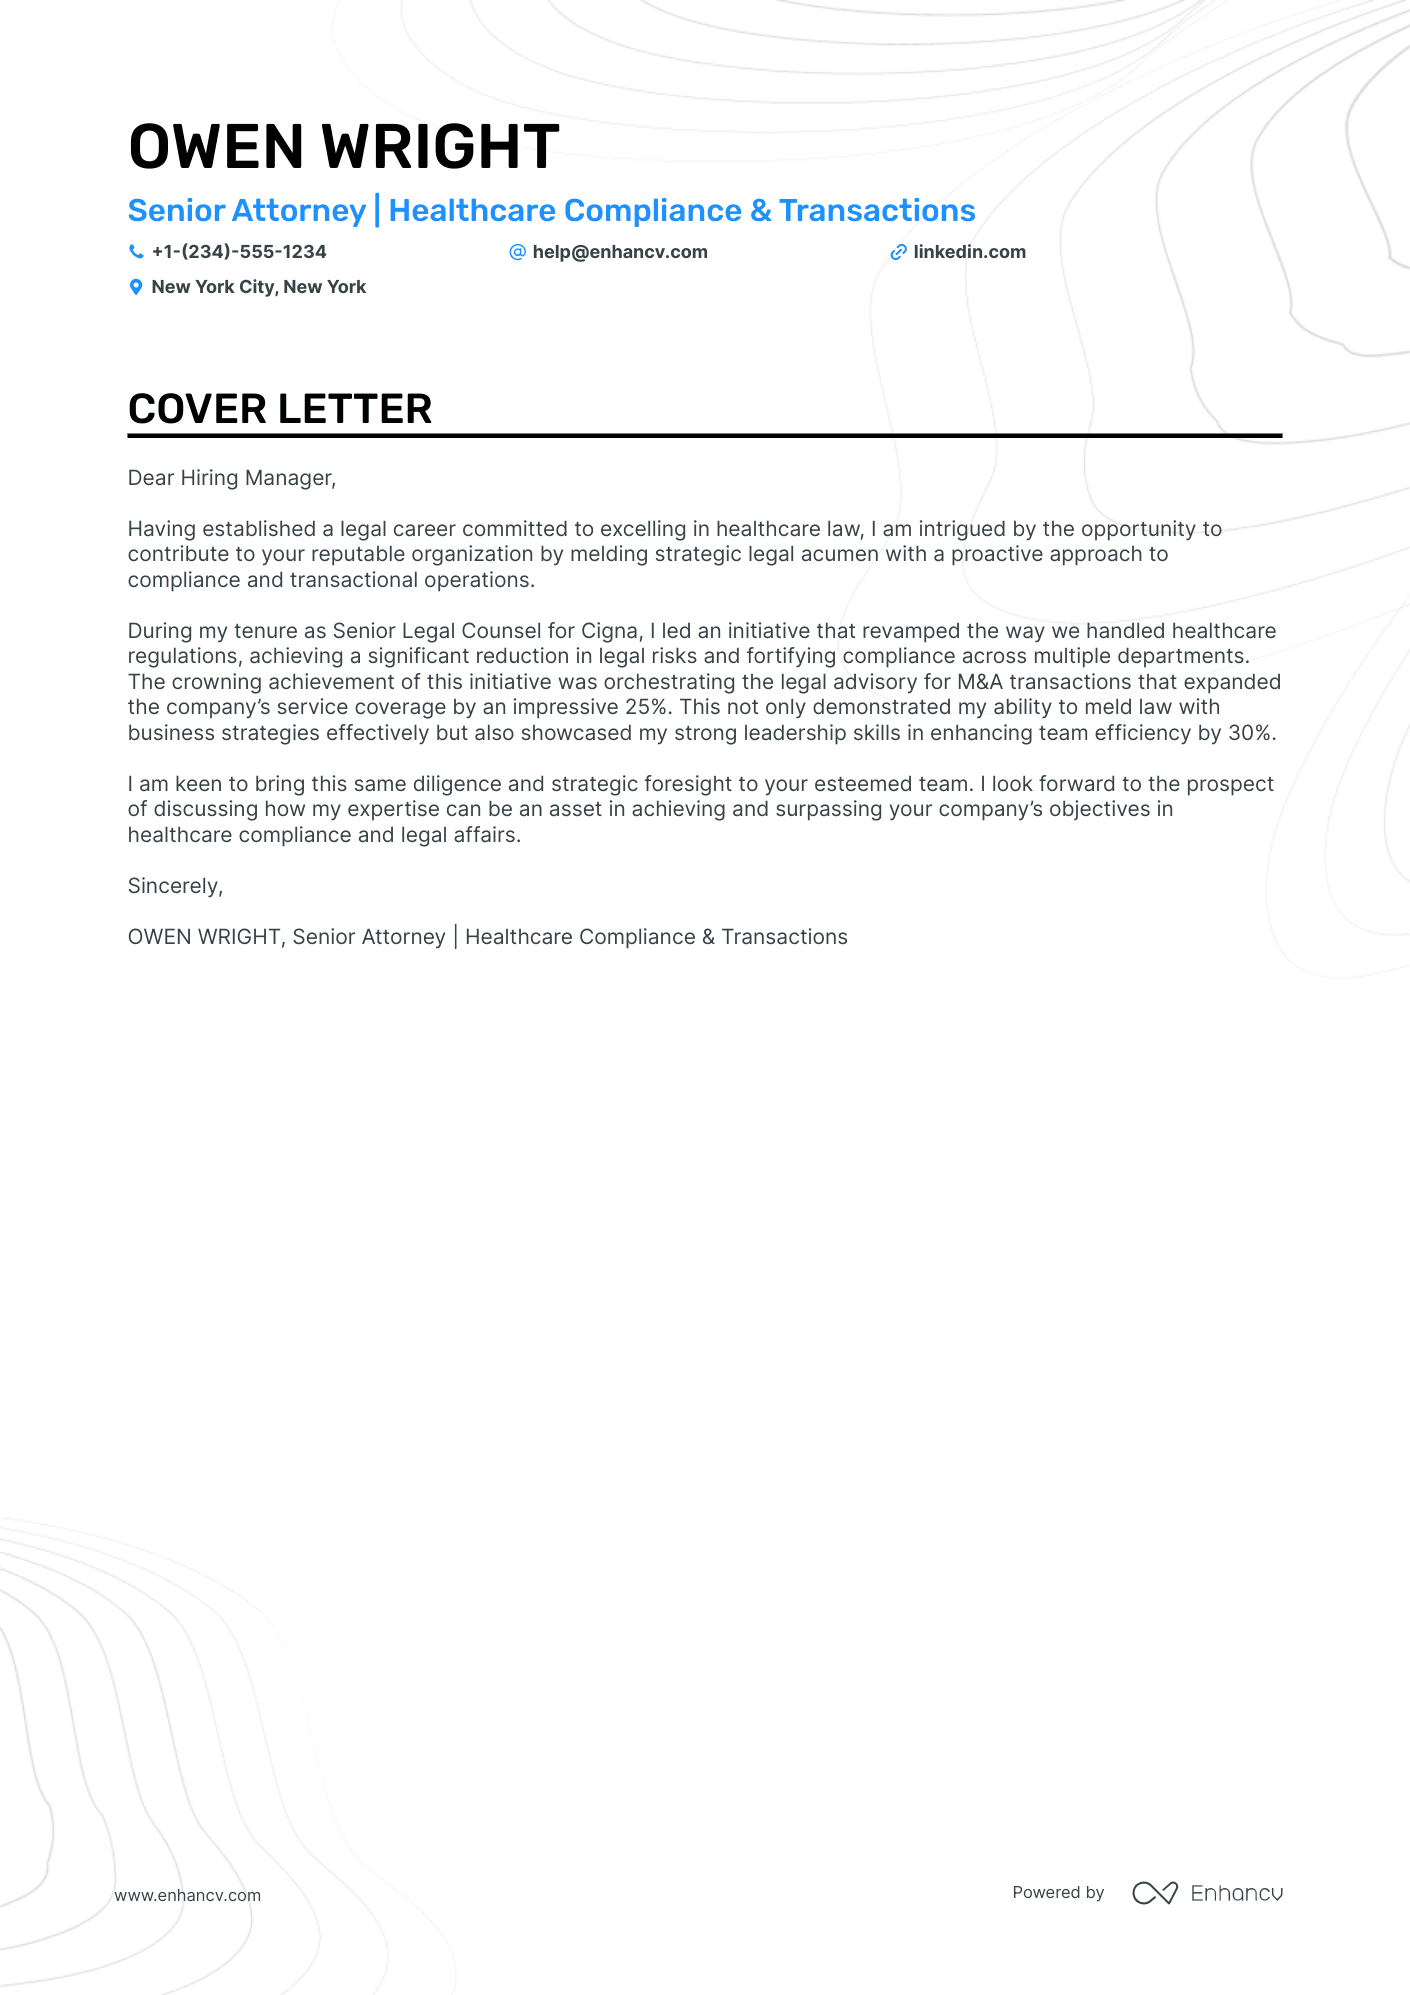 Counsel cover letter